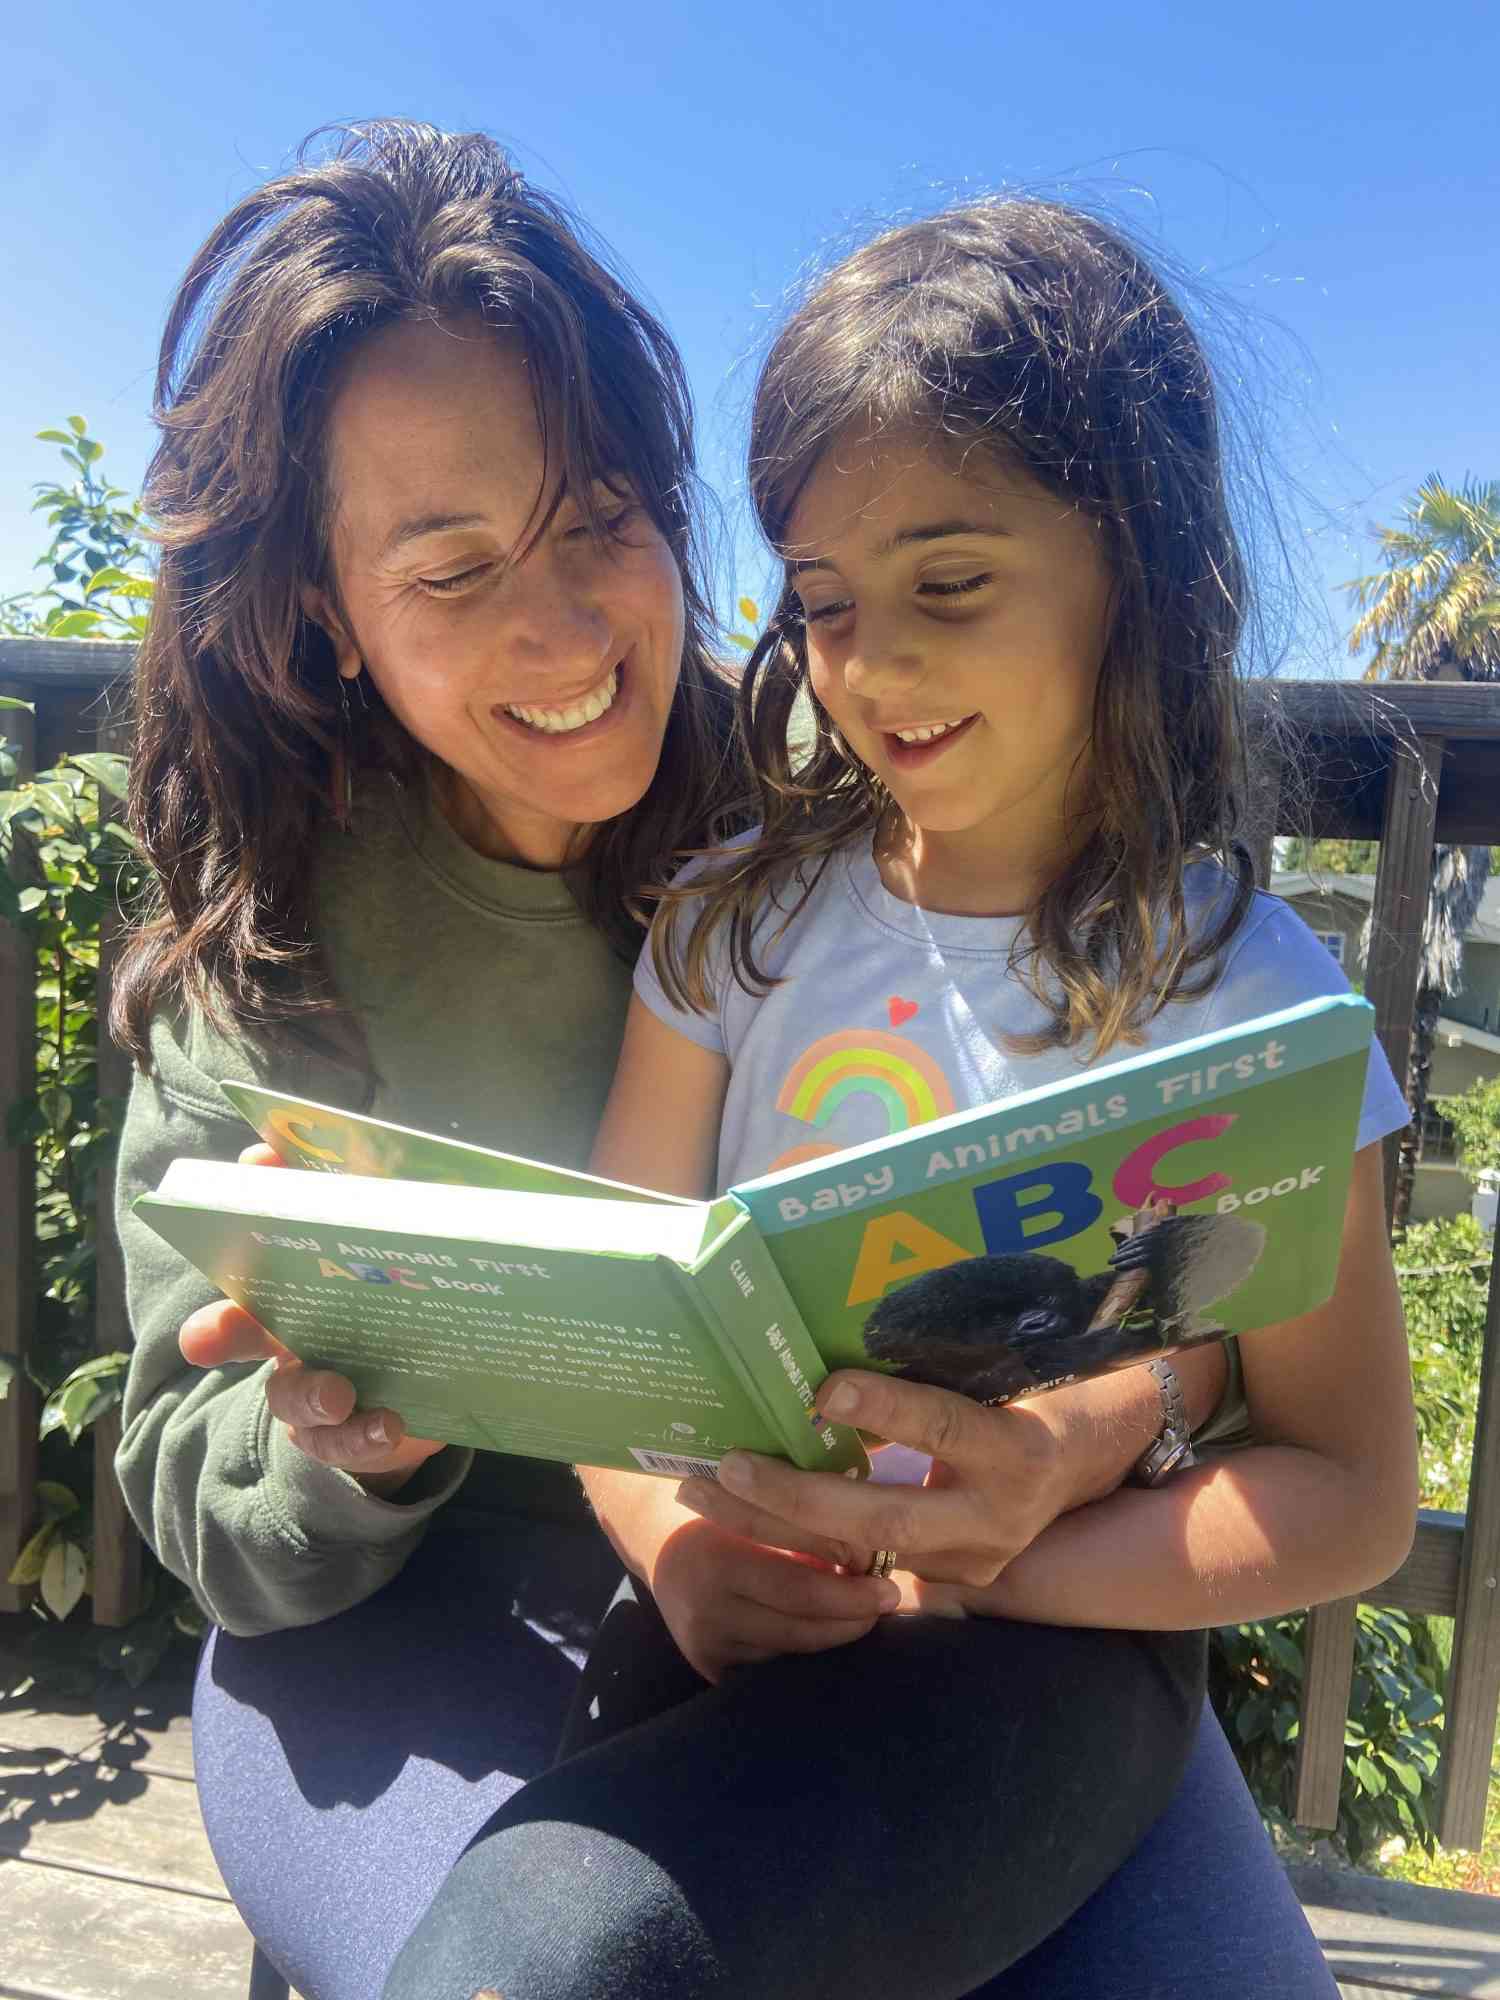 The author reading with her child.